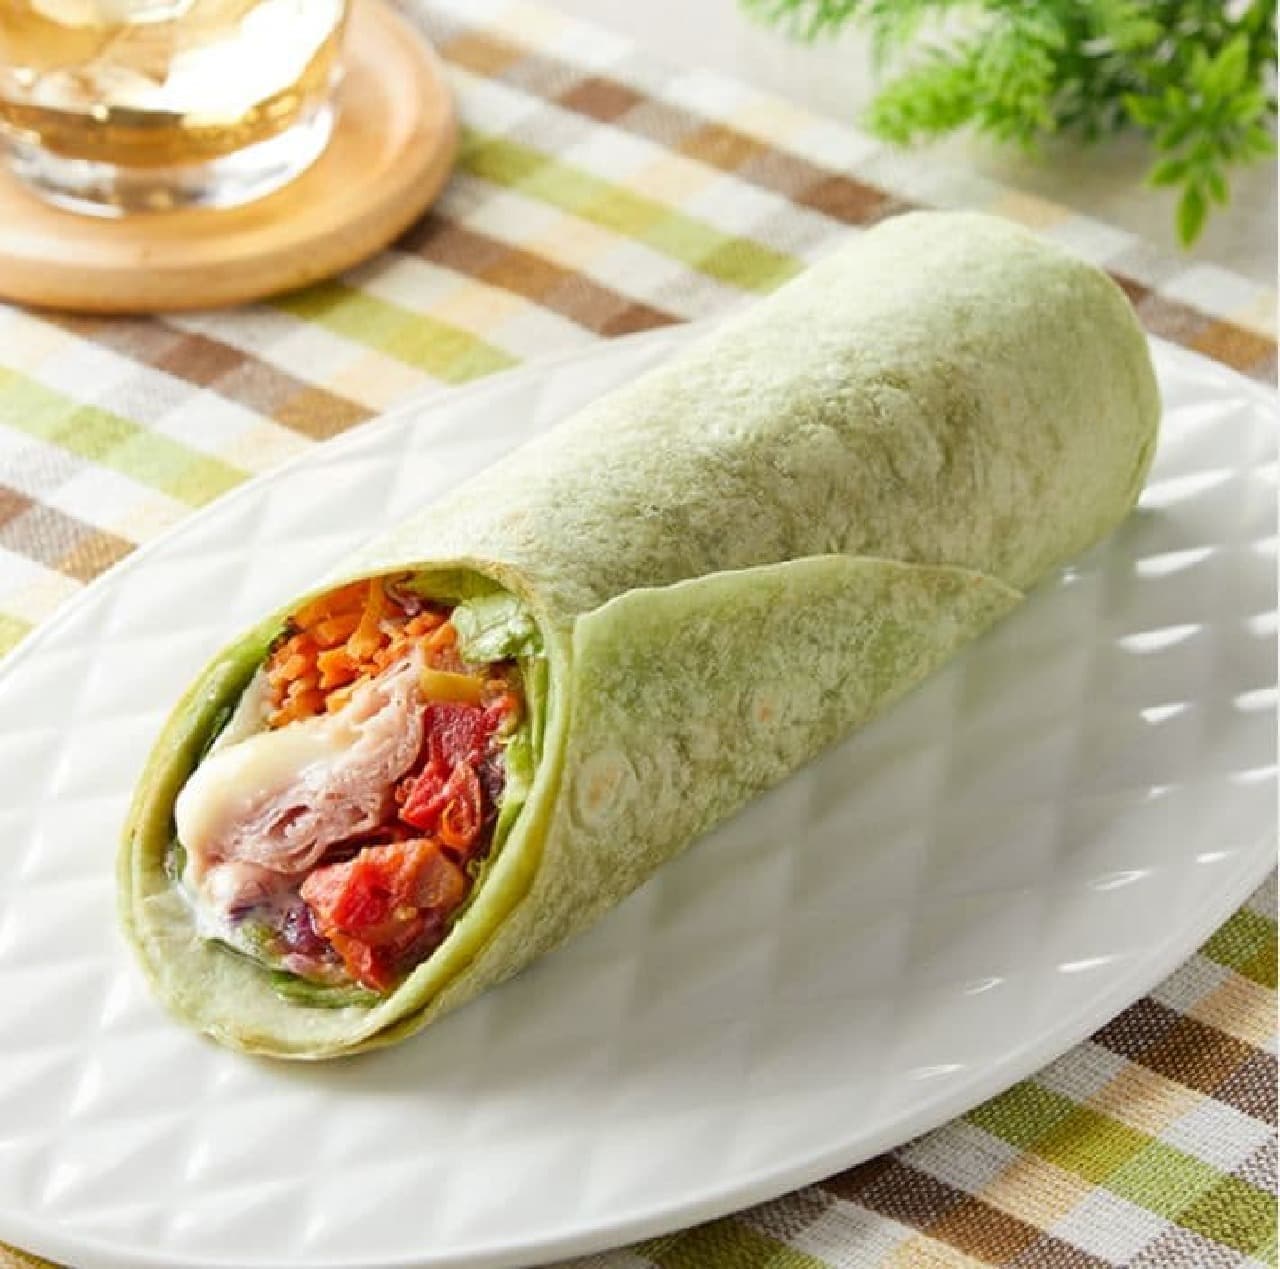 FamilyMart "Salad Wrap with 7 kinds of vegetables and ham